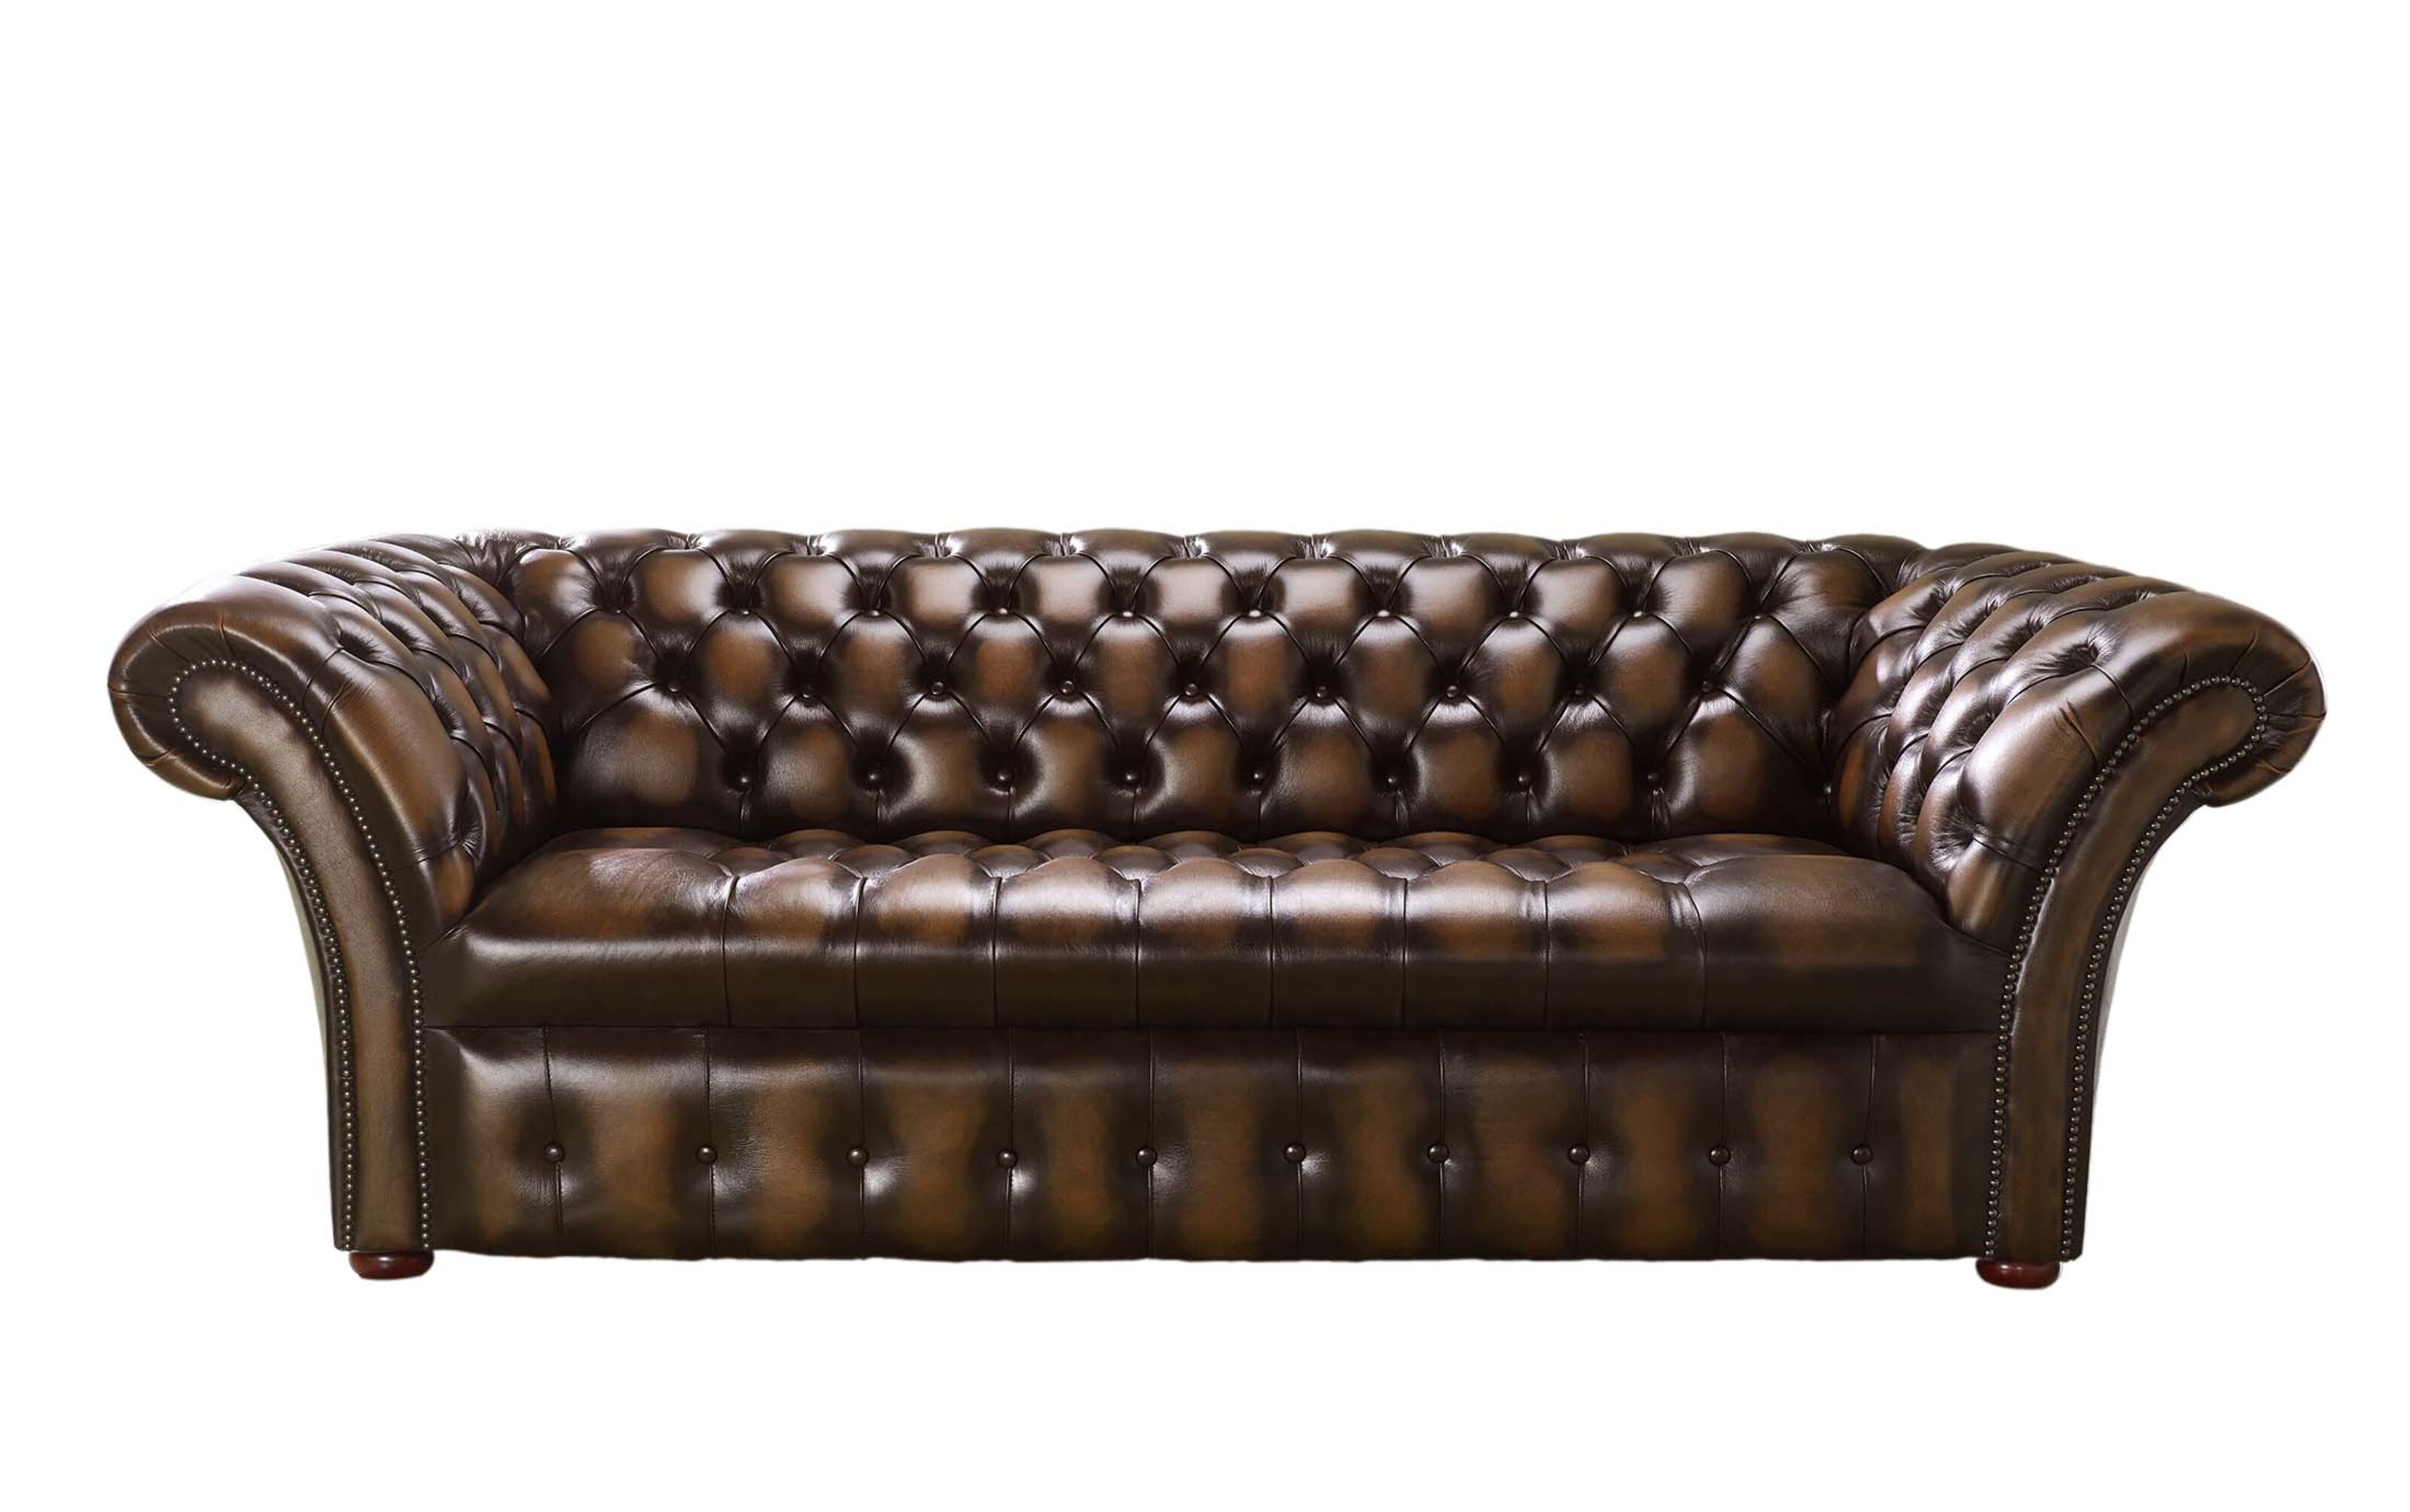 Elevate Your Home with Elegant & Comfortable La-Z-Boy Sofas  %Post Title